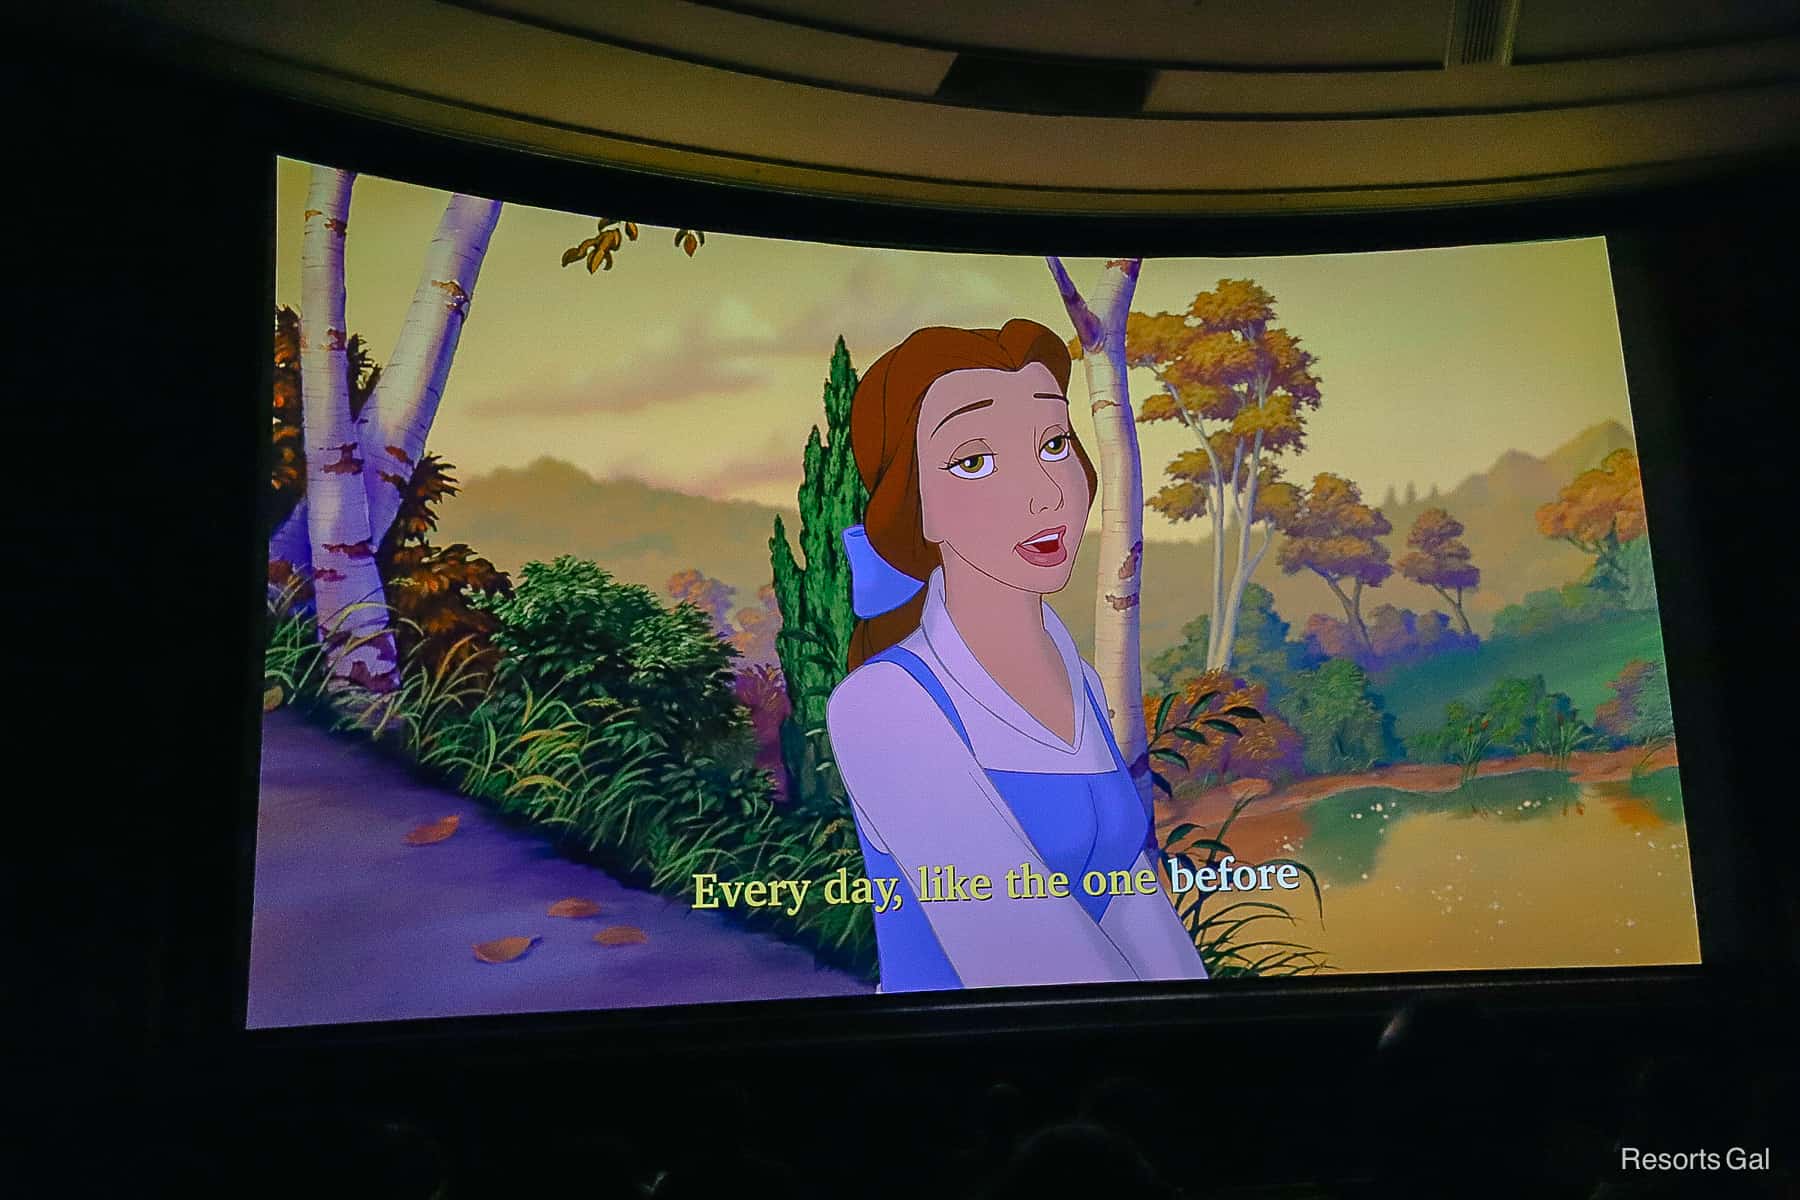 Sing Along lyrics on the screen "Every day, like the one before." Belle with mundane expression. 